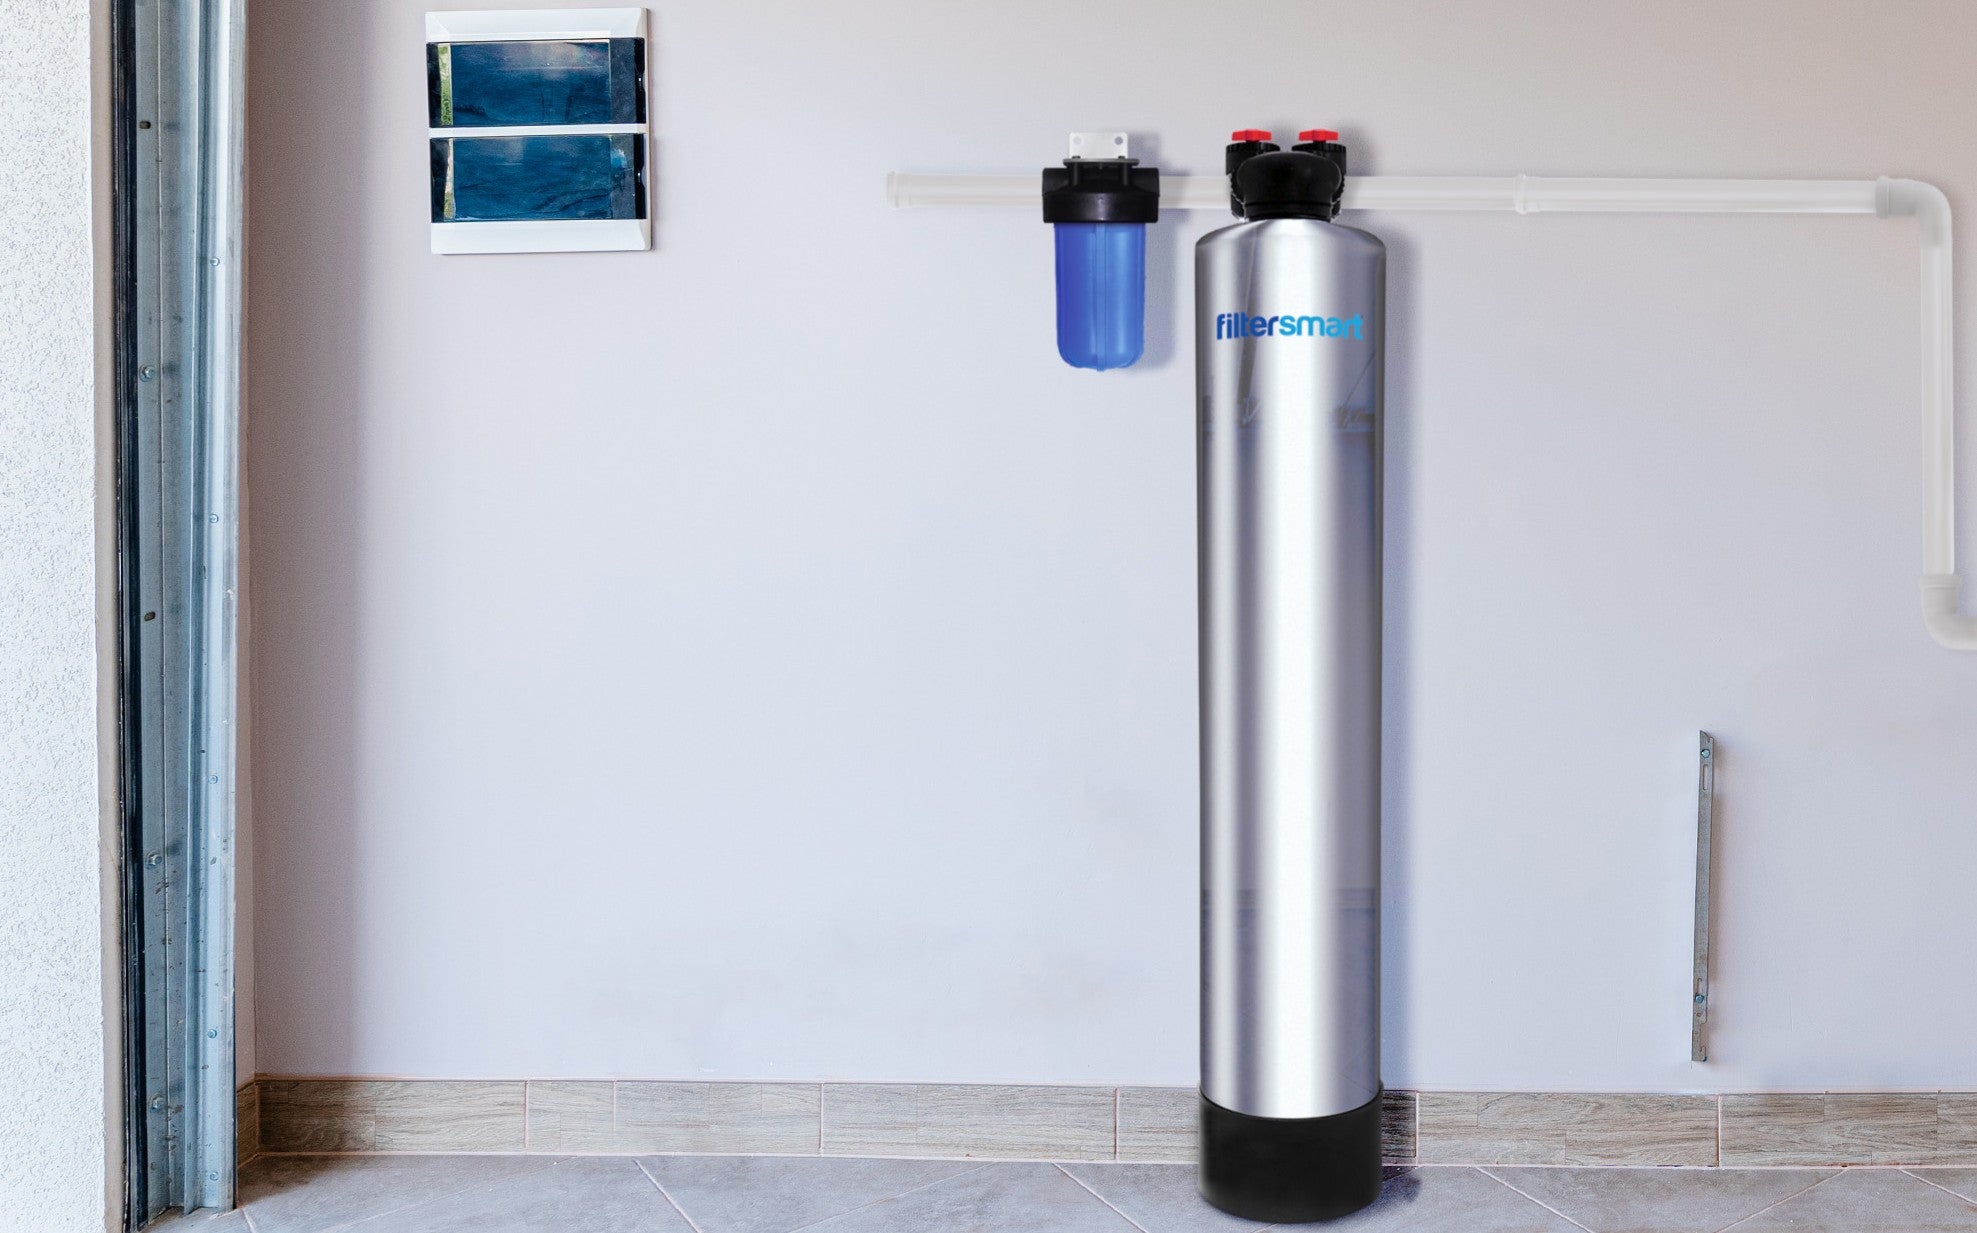 Water Softener vs. Water Filter: Which Do I Need?